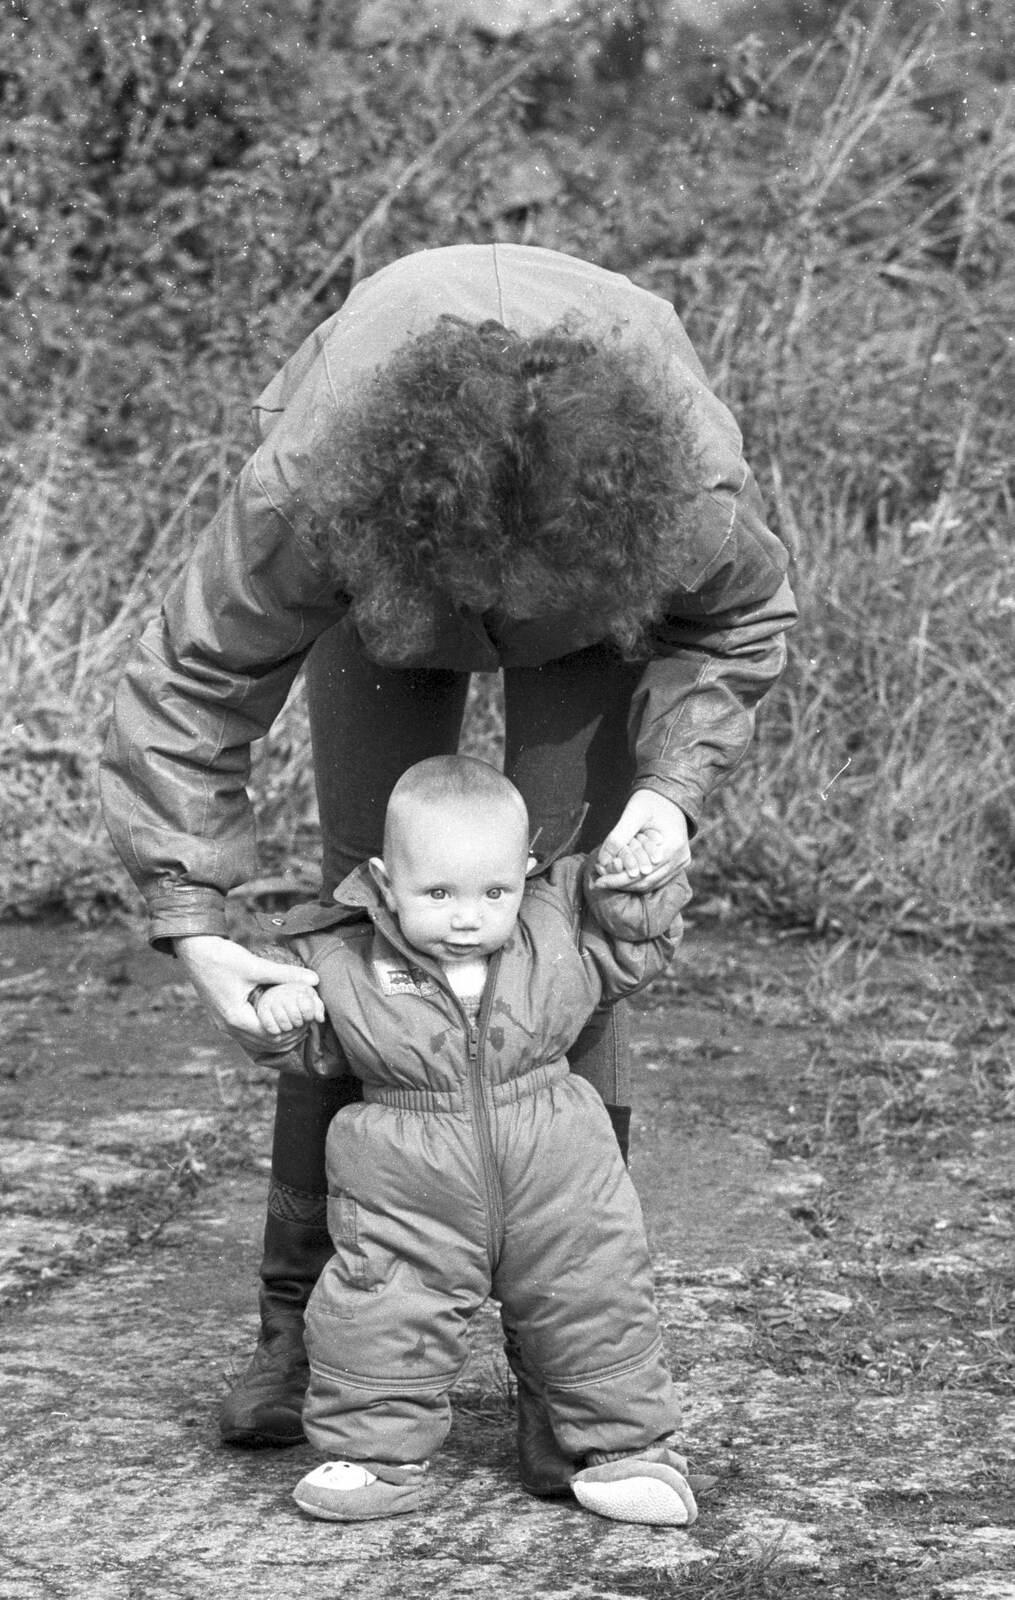 The baby does a toddle from Cider Making in Black and White, Stuston, Suffolk - 11th October 1992